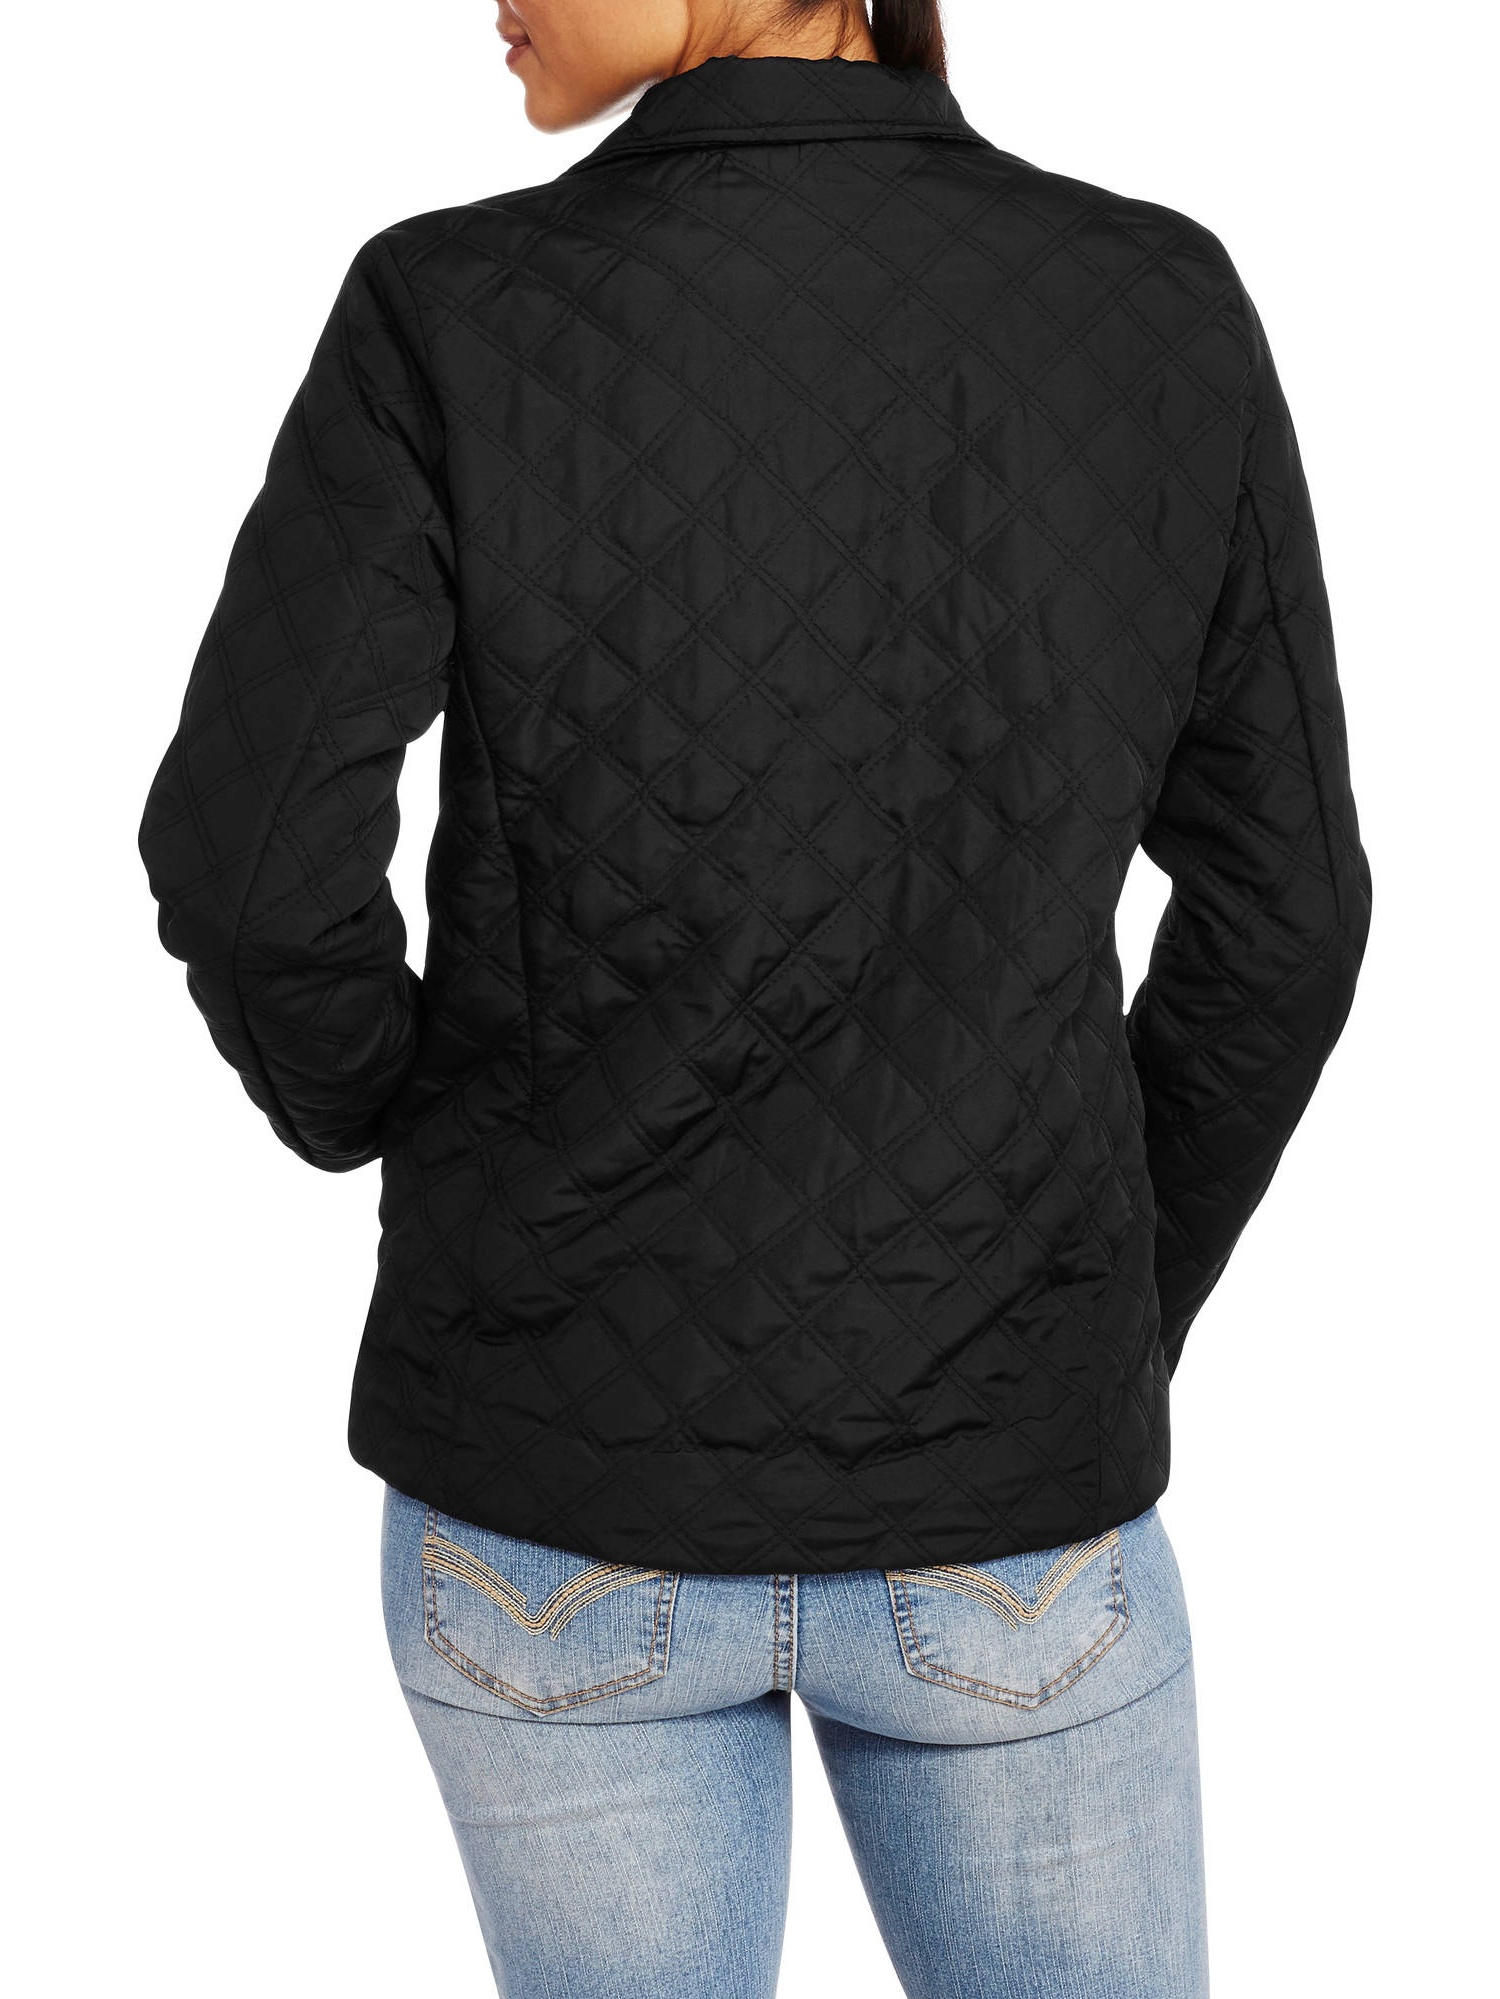 Women's Quilted Barn Jacket - image 2 of 2